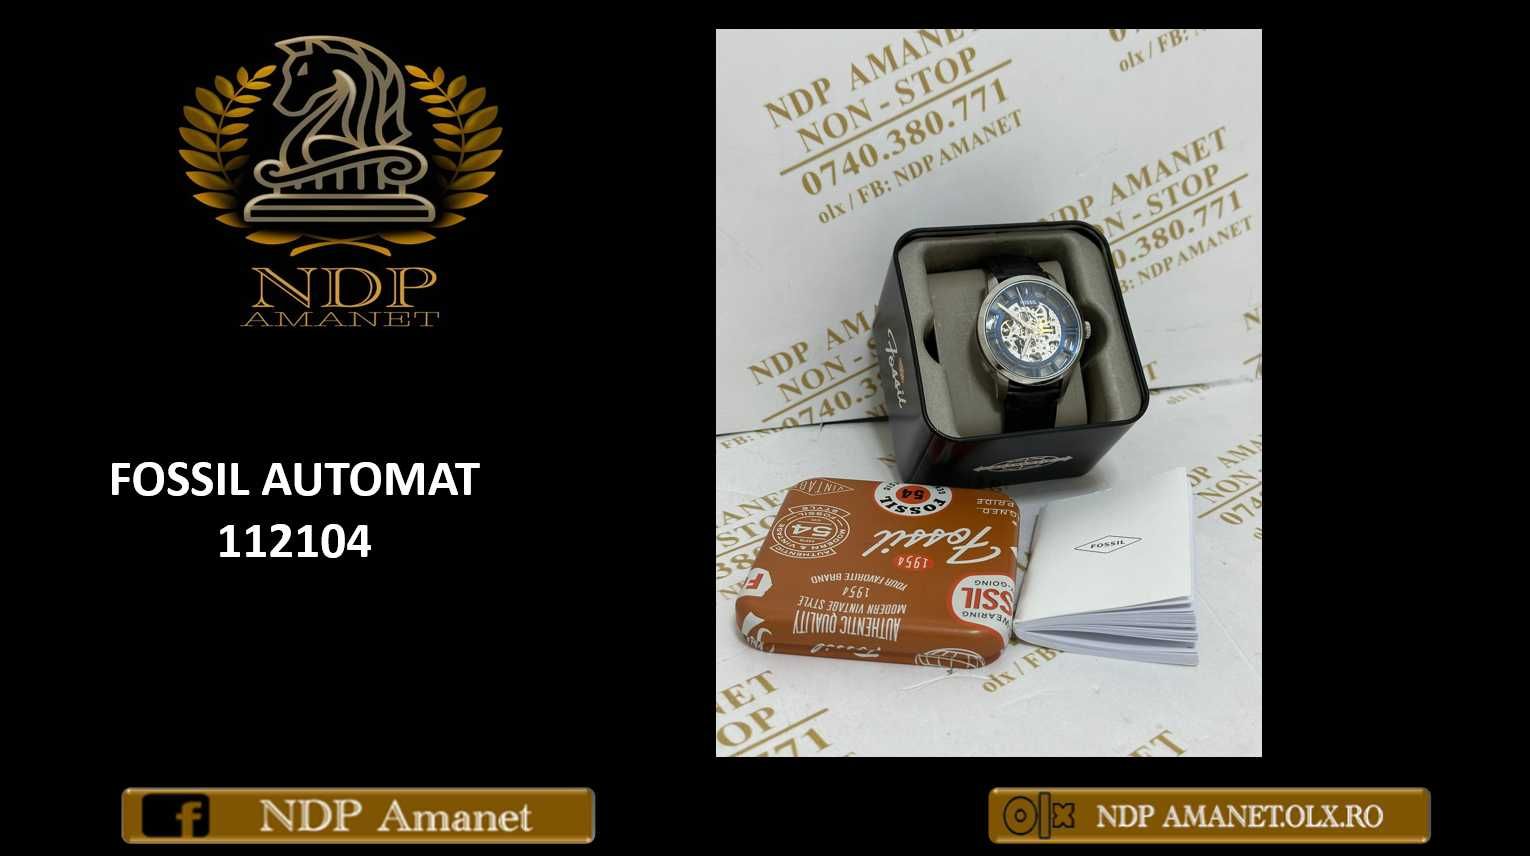 NDP Amanet NON-STOP Sos. Giurgiului 119 - FOSSIL AUTOMATIC (18707)